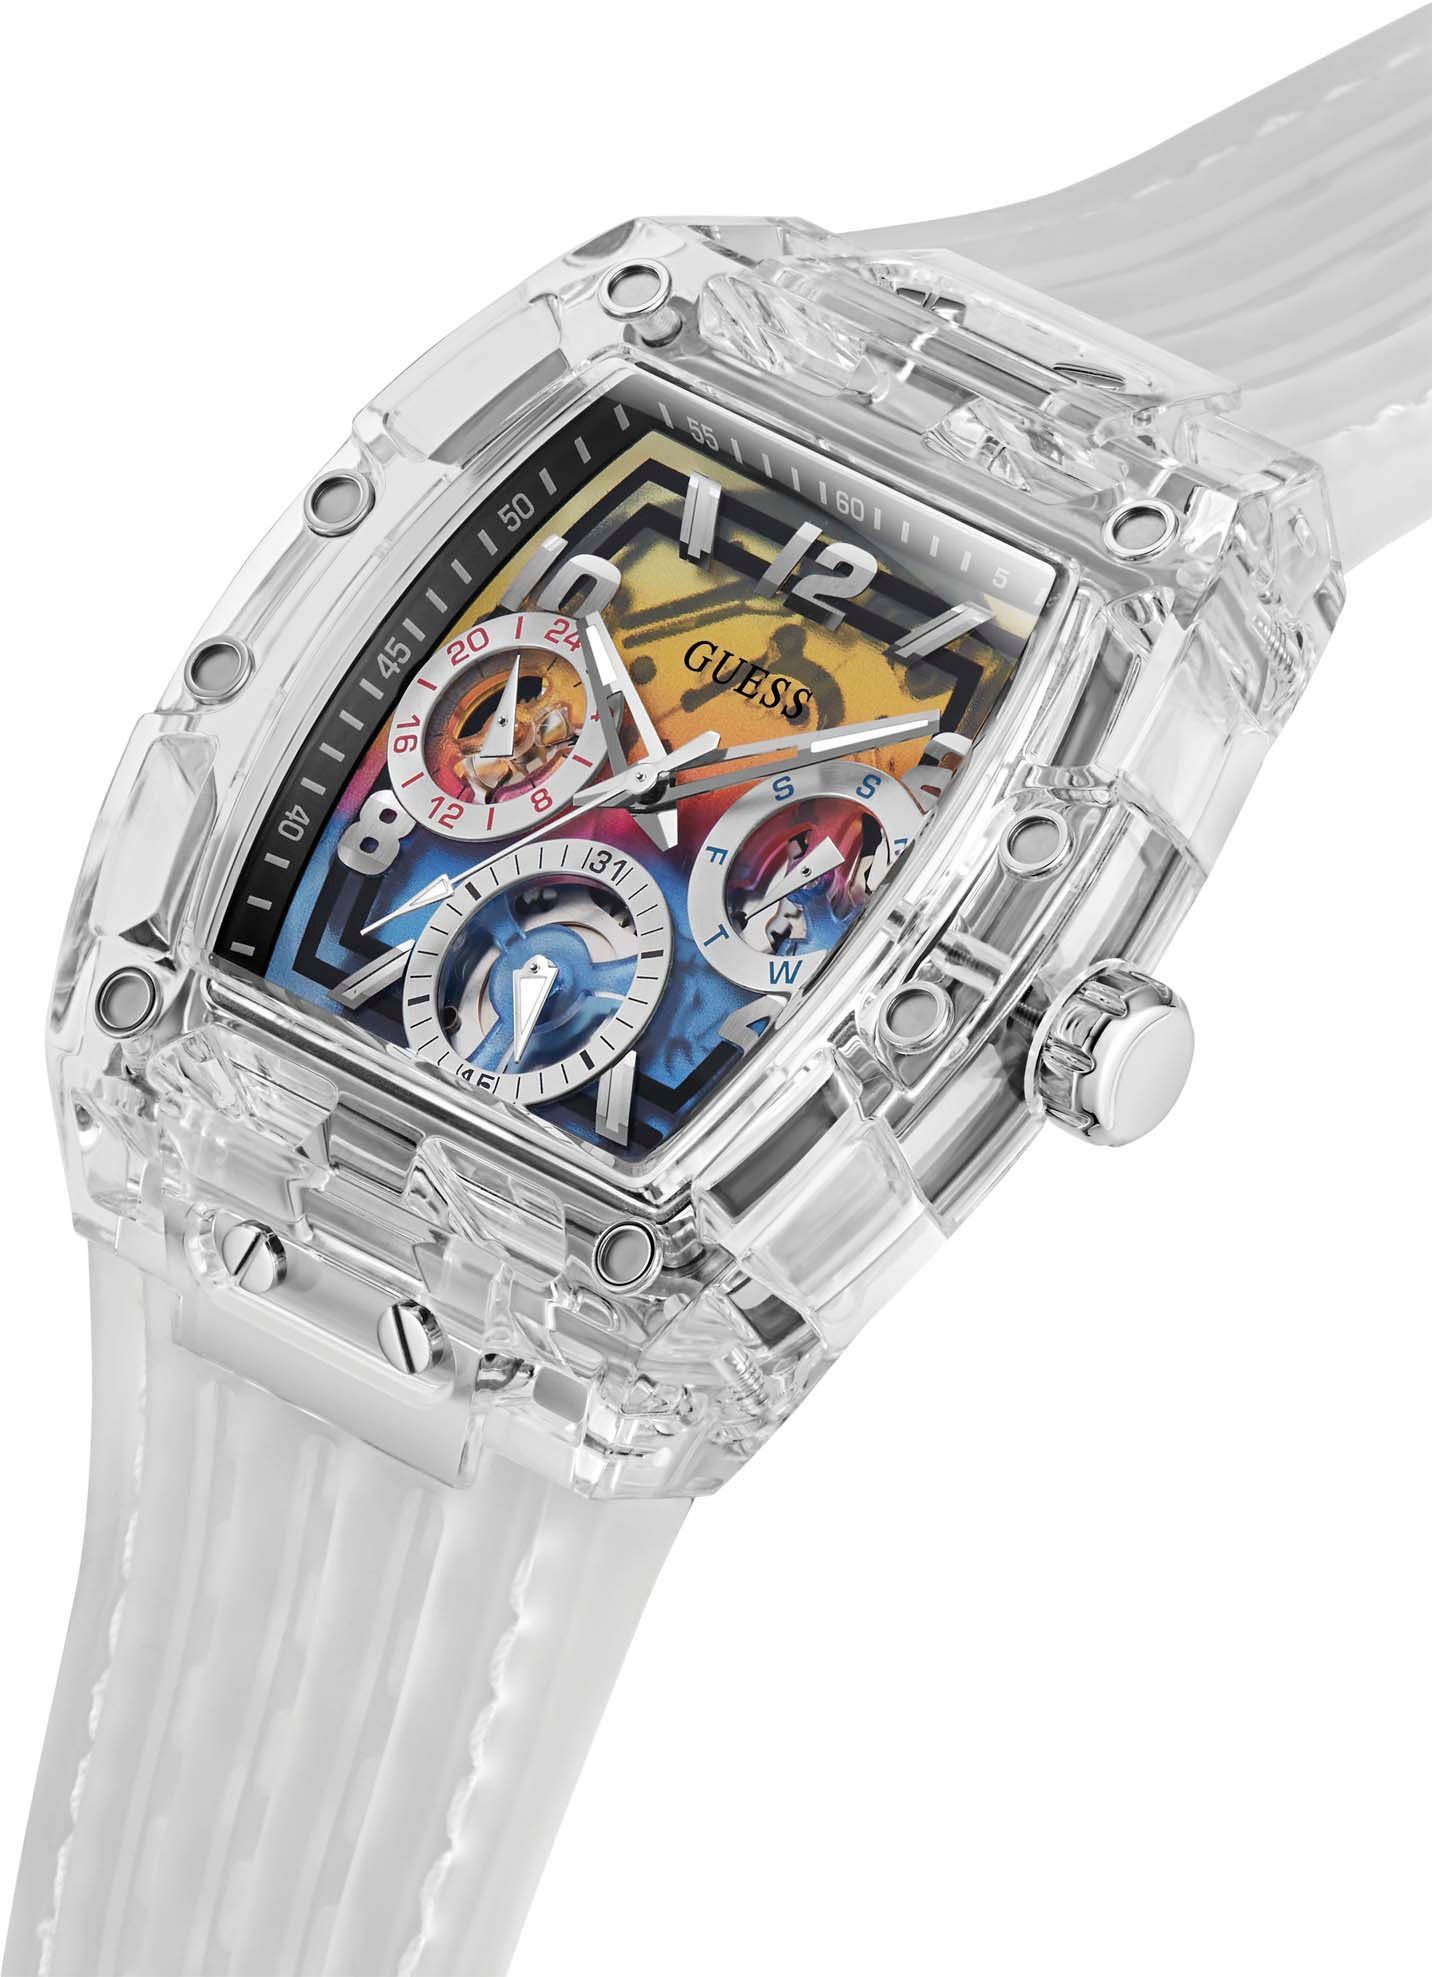 Guess GW0499G3 Multifunktionsuhr